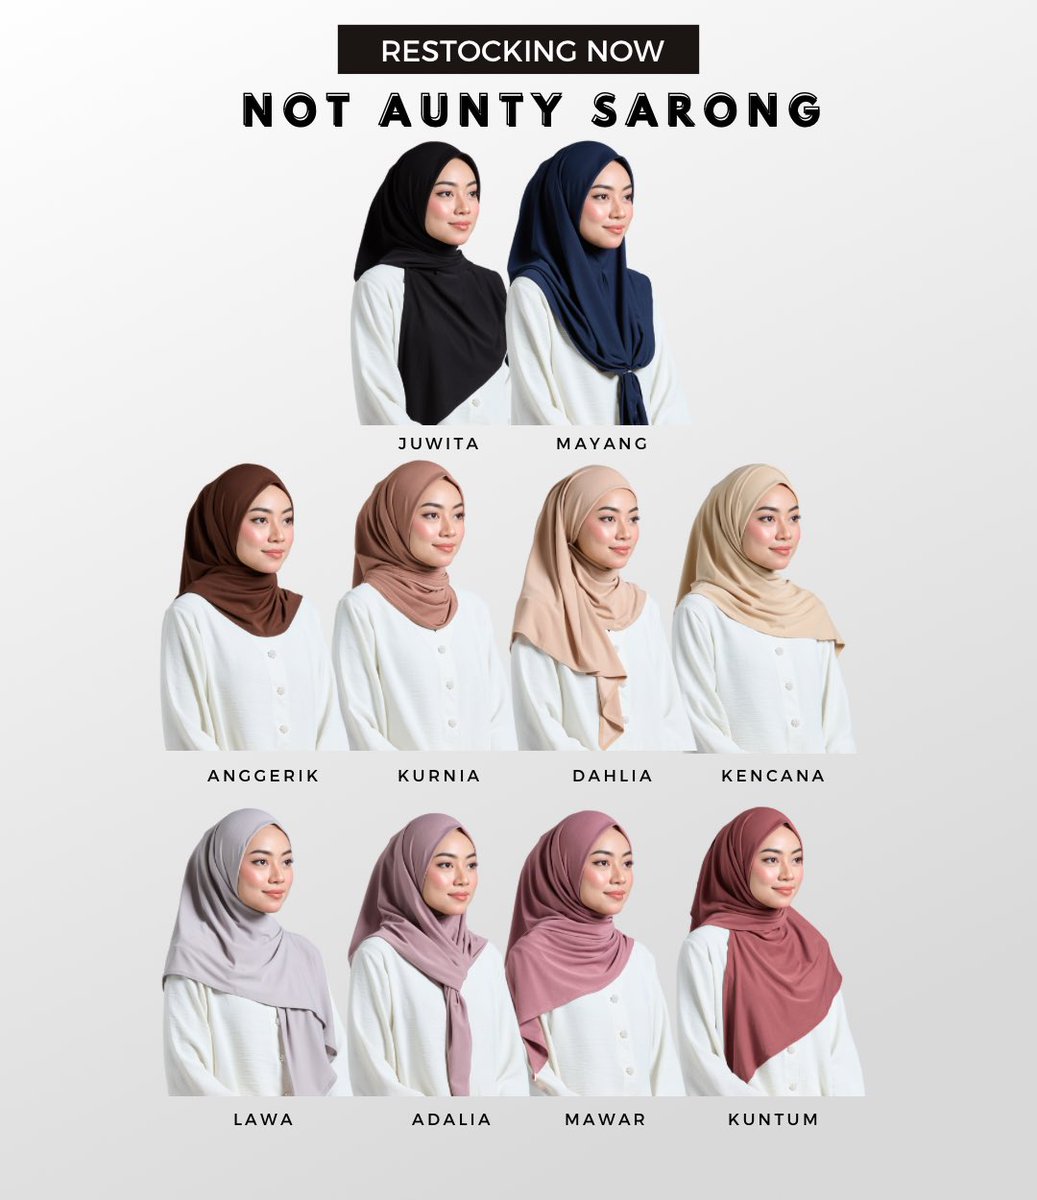 Not Aunty Sarong is now officially restocked ✨

Grab before soldout guysss 🫶🏻